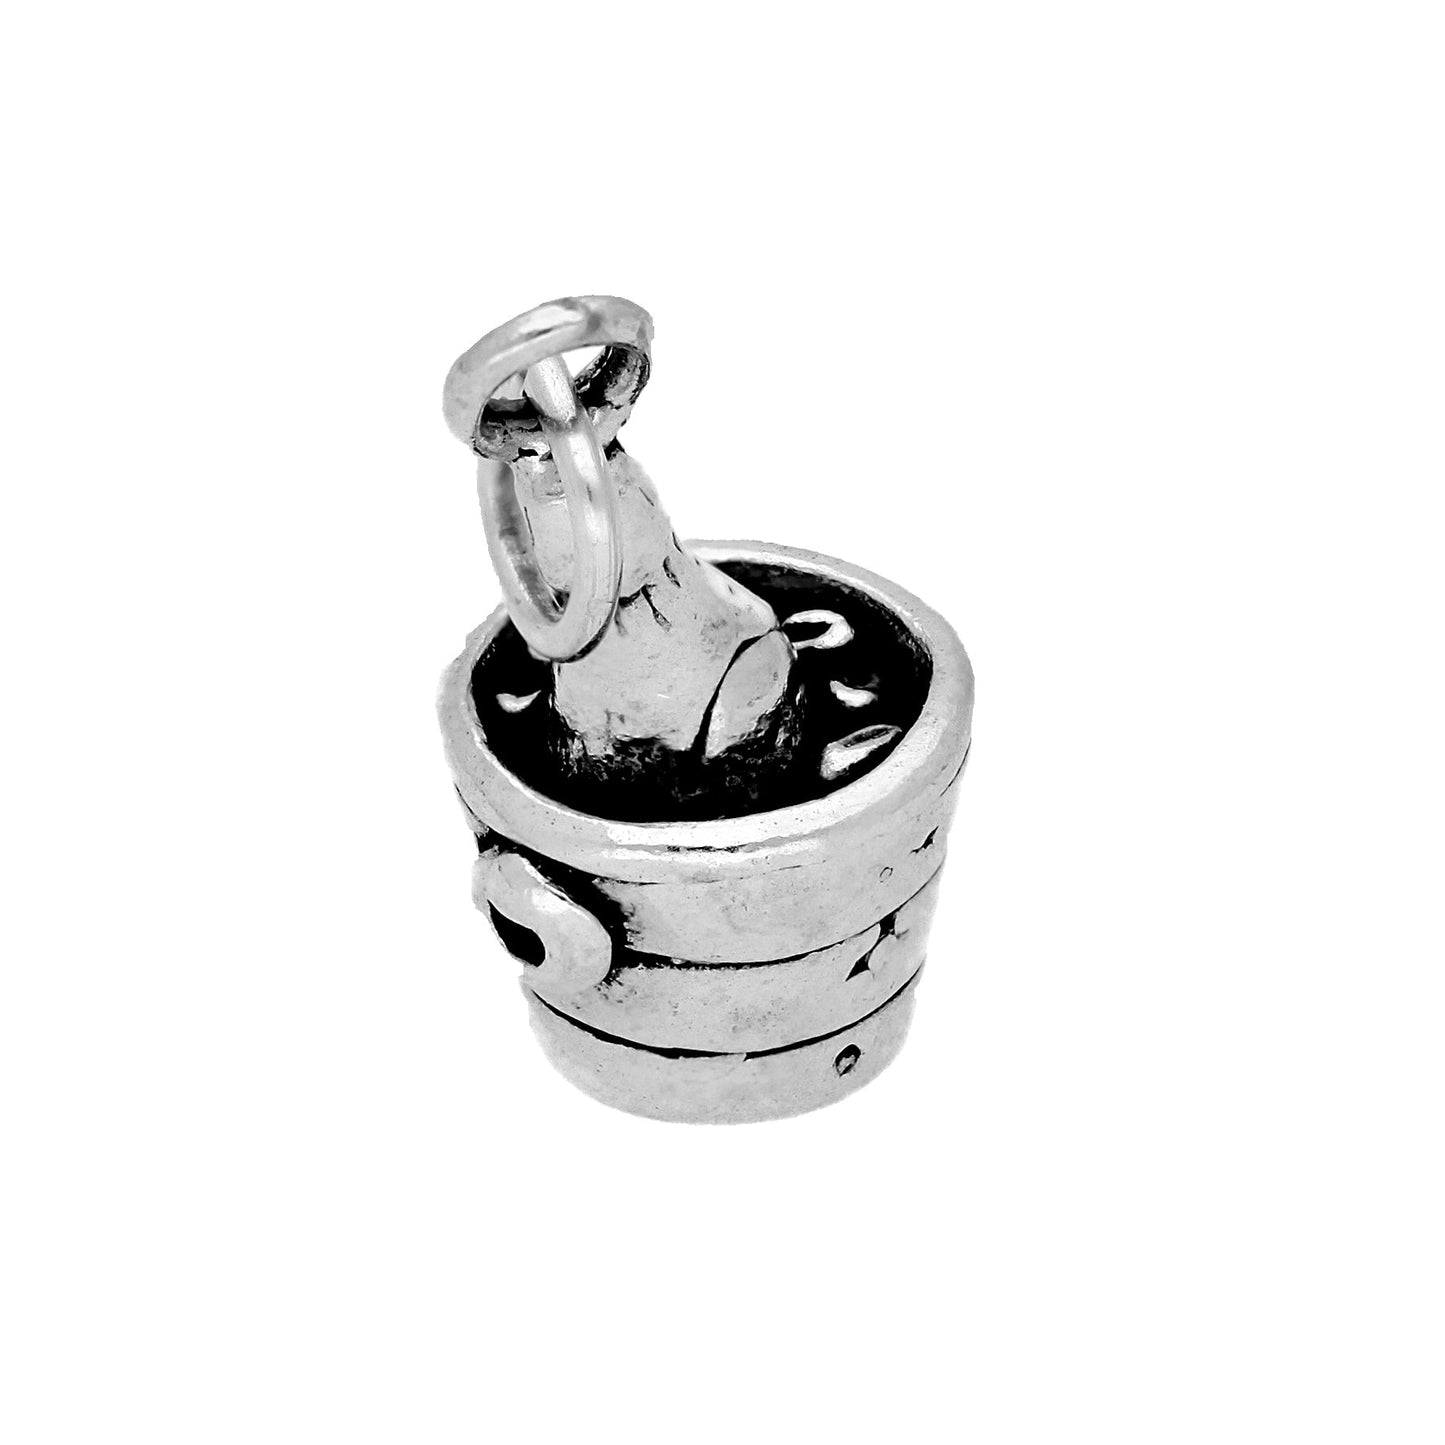 Sterling Silver Champagne Bucket Charm